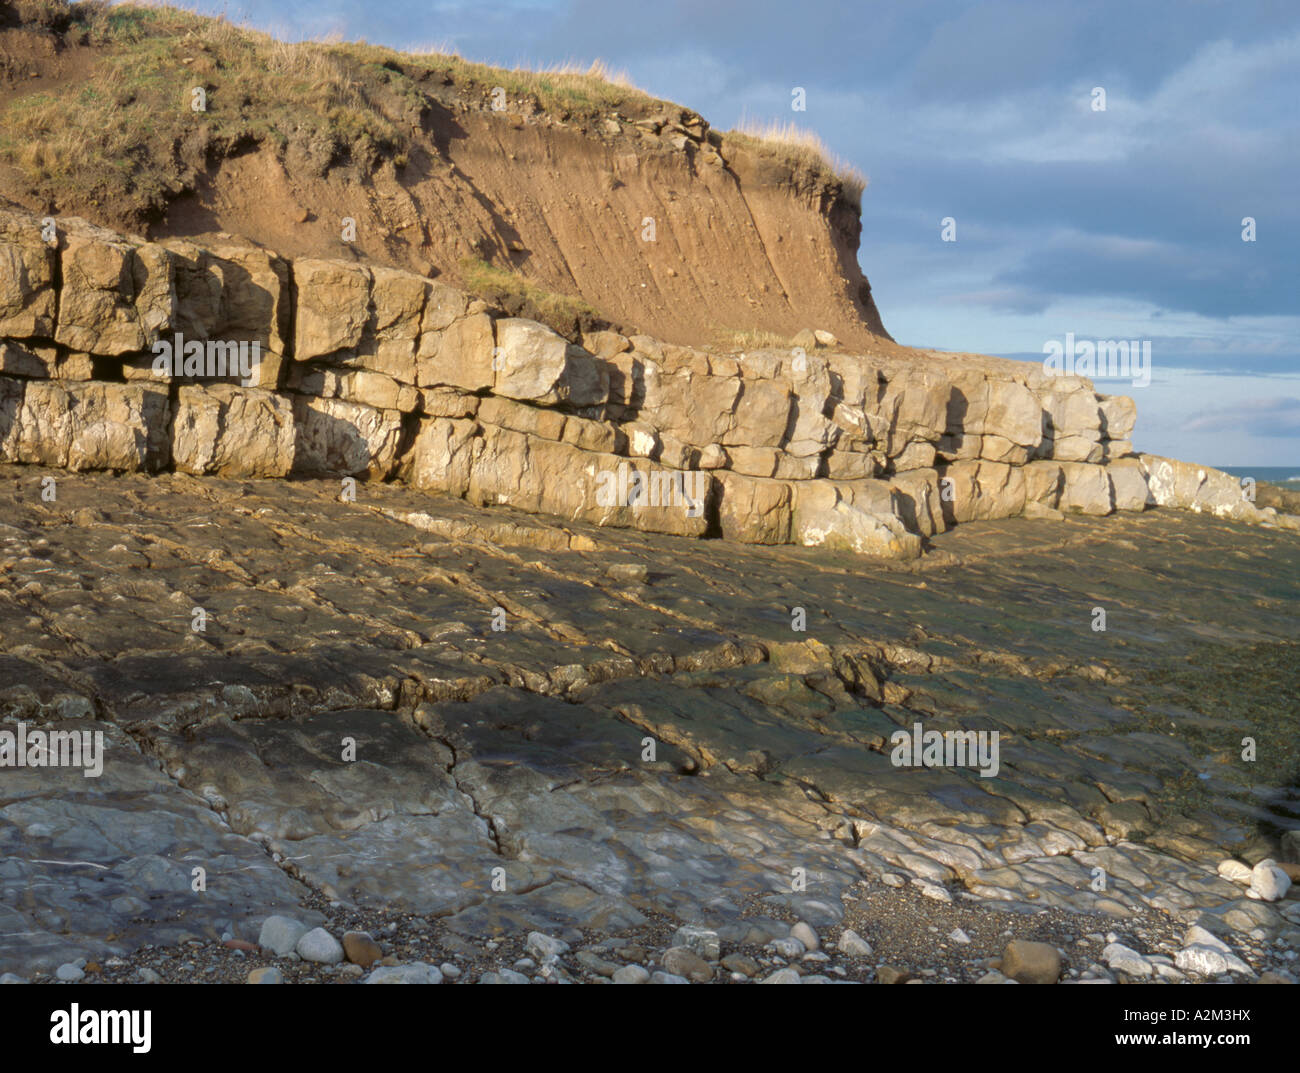 Wave cut platform in carboniferous limestone, over lain with boulder clay, near Newton-by-the-Sea, Northumberland, England, UK. Stock Photo